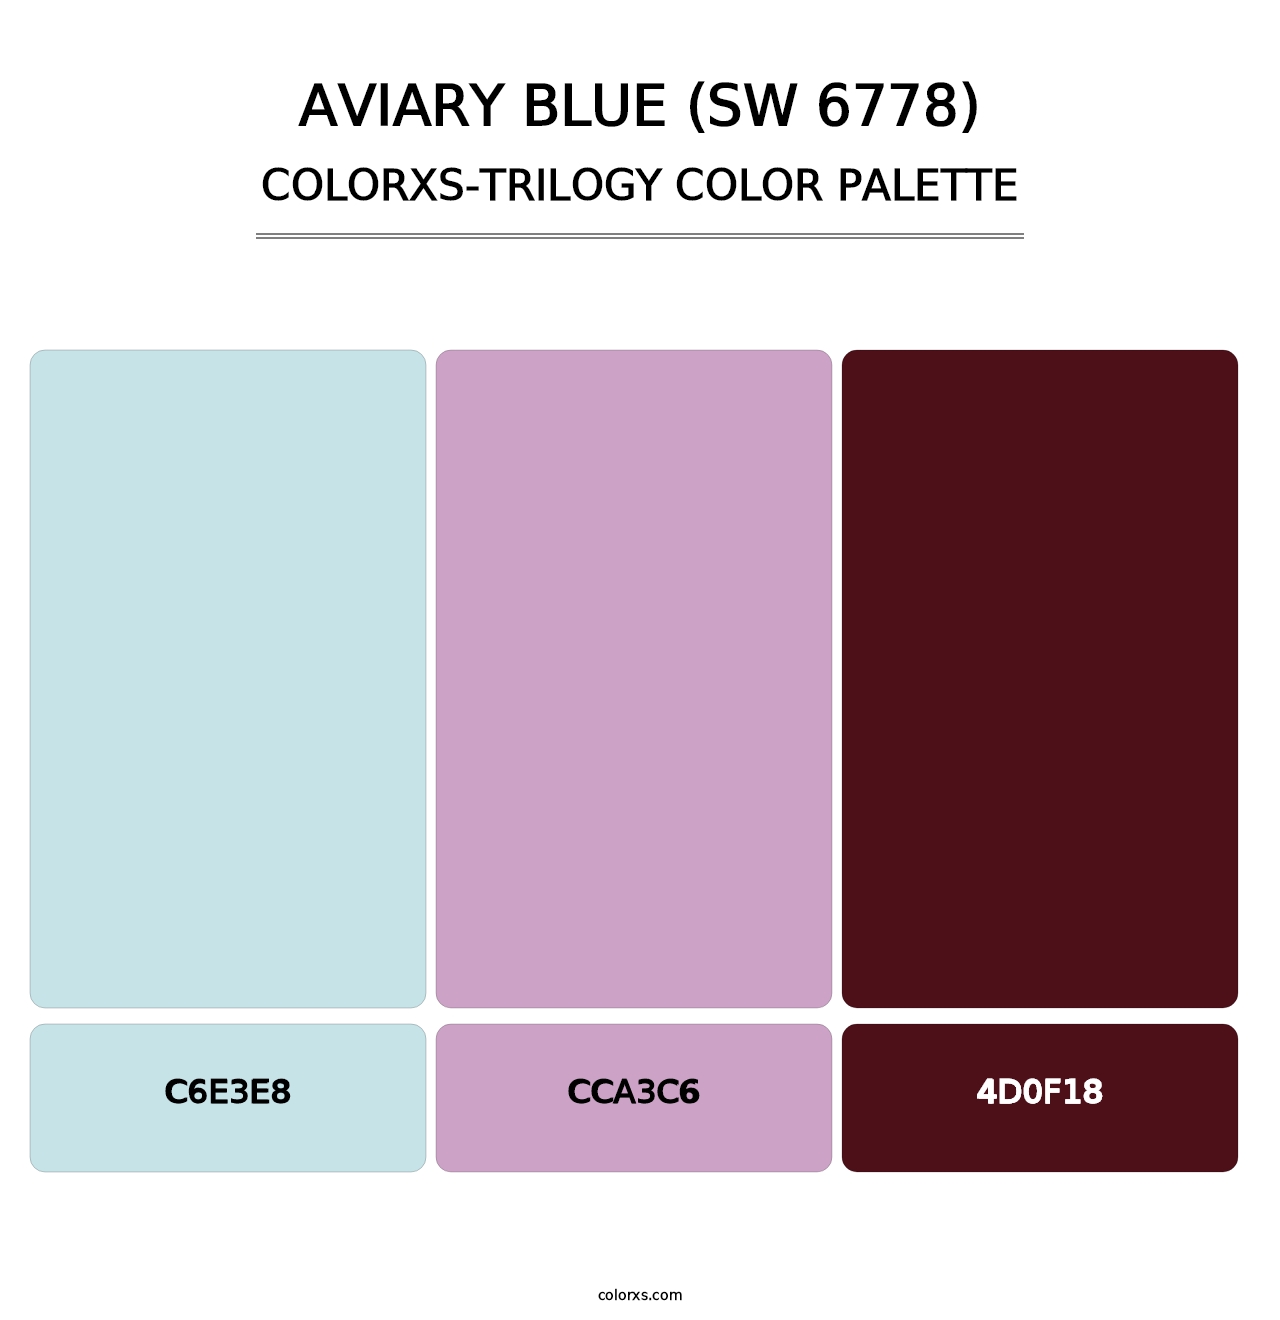 Aviary Blue (SW 6778) - Colorxs Trilogy Palette